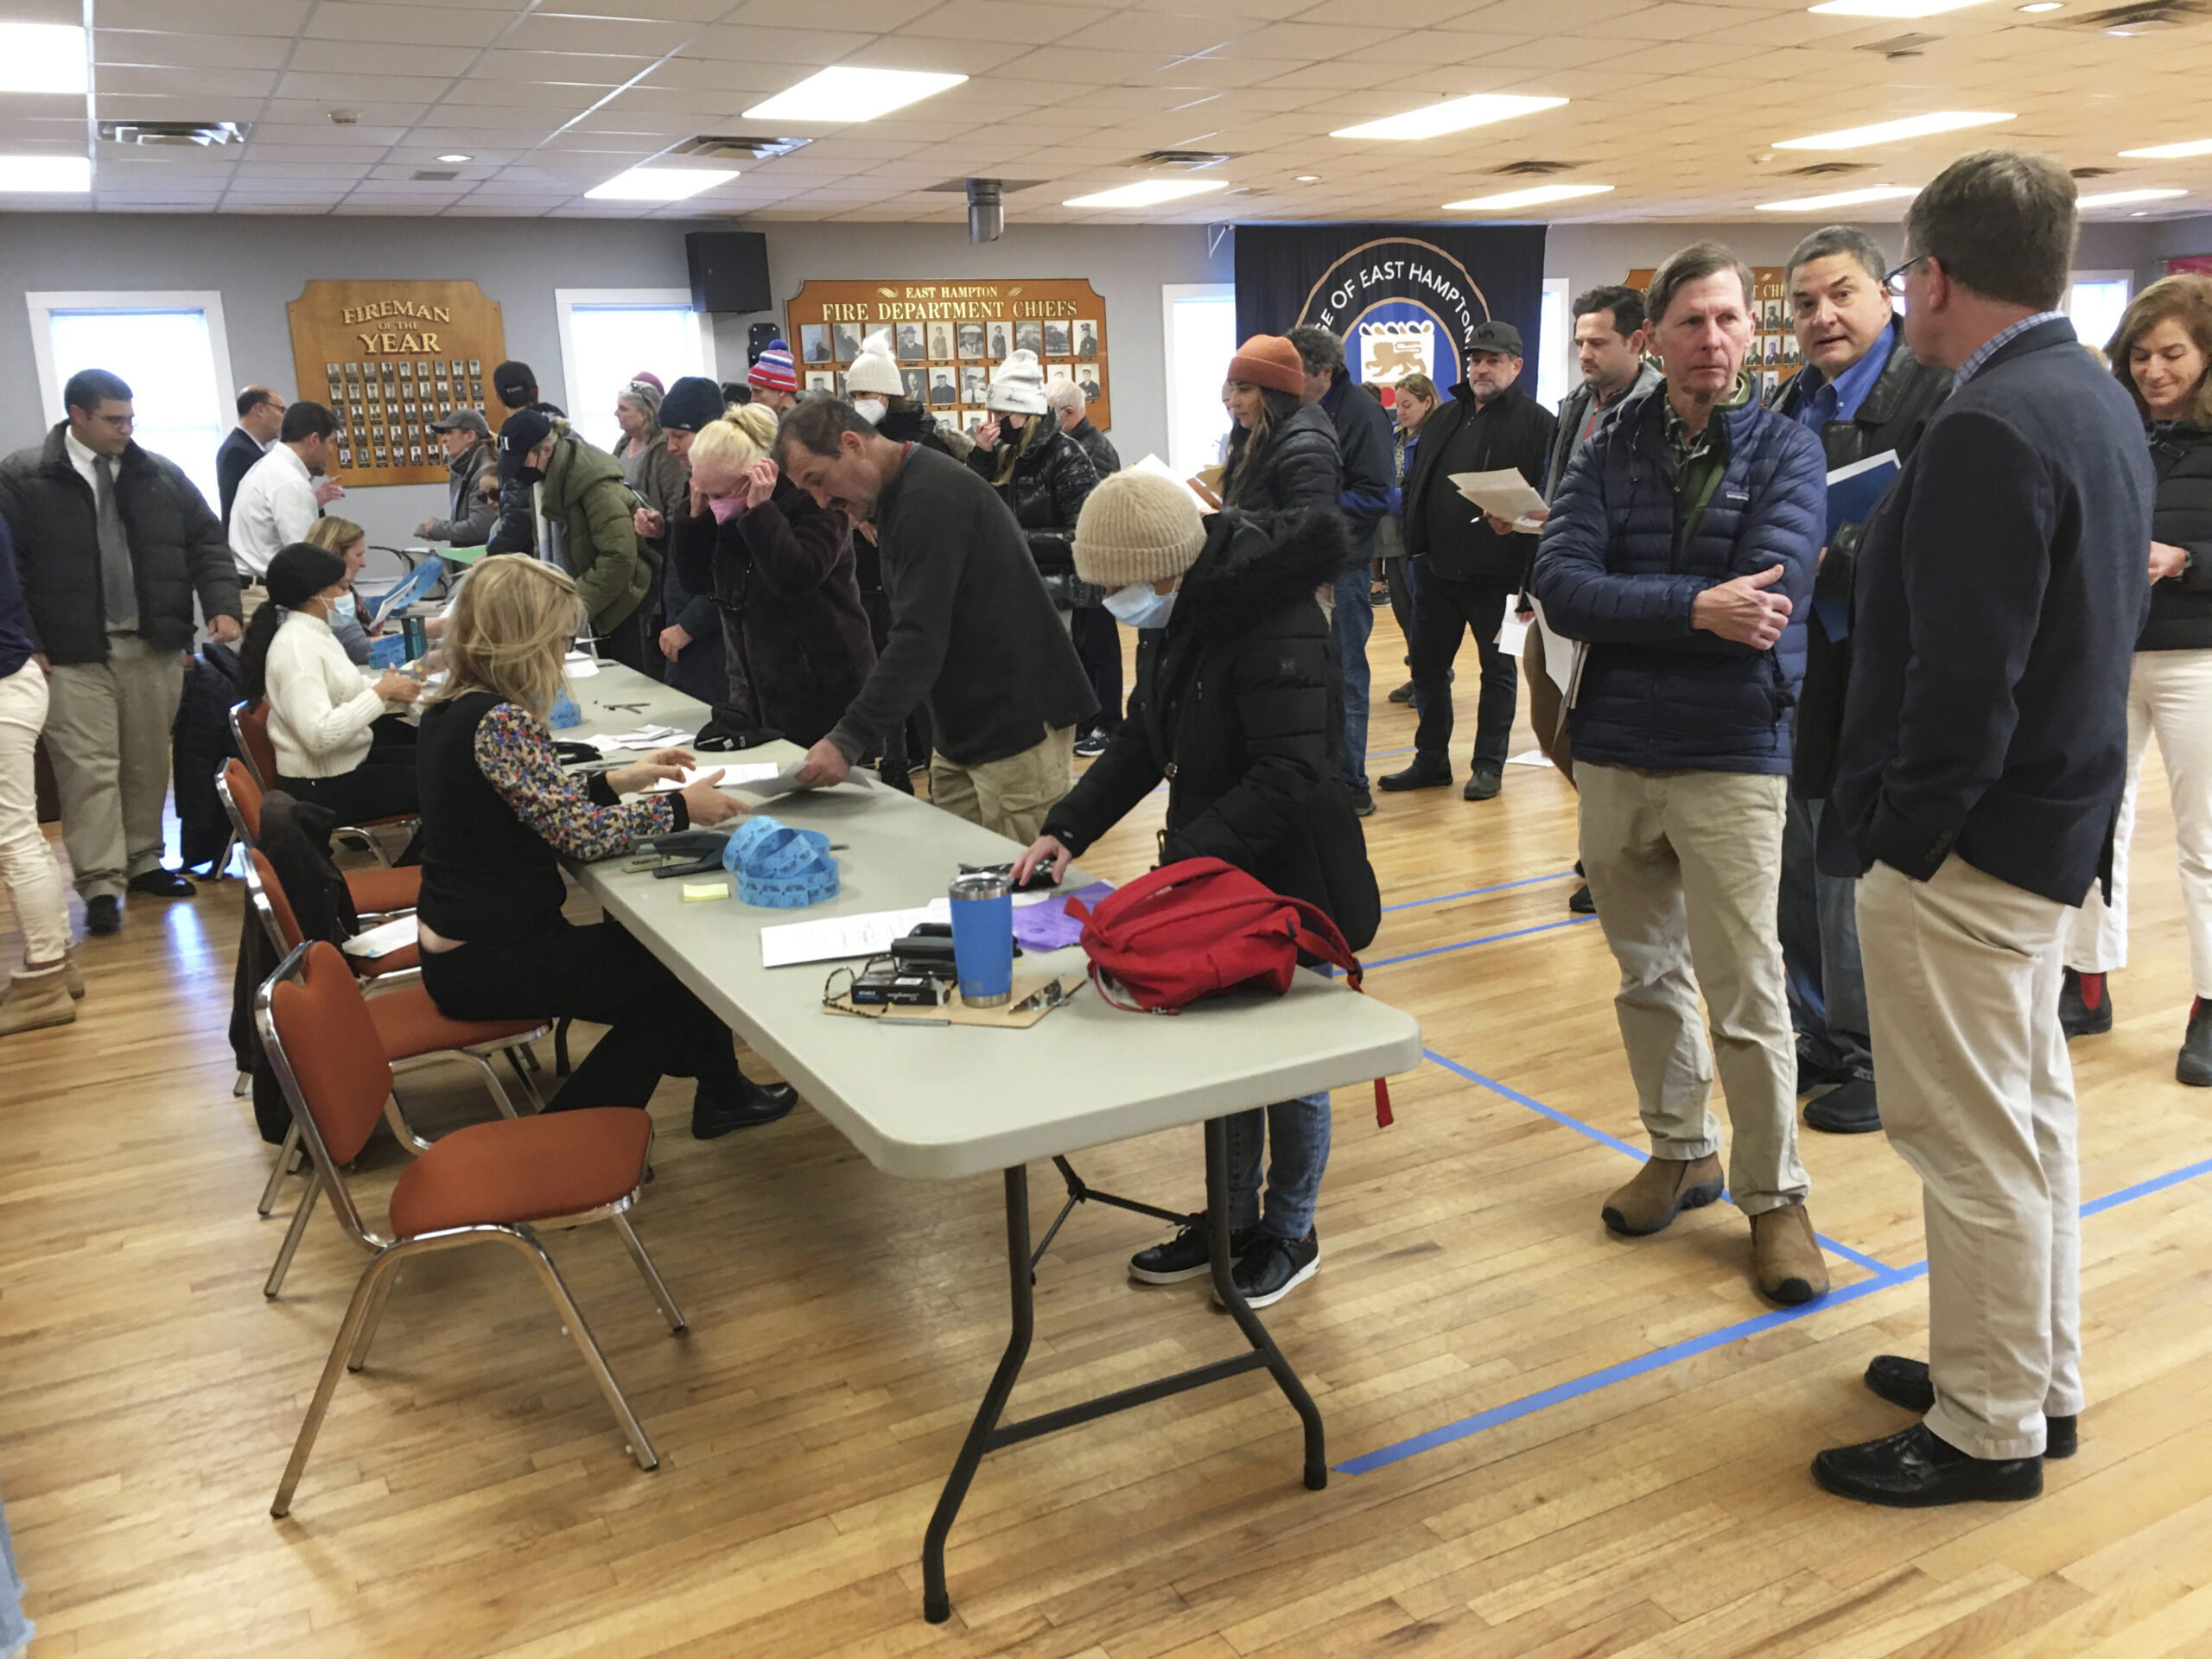 More than 1,000 local residents lined up at the East Hampton Village Emergency Services Building on Friday morning to buy a non-resident beach parking permits for the village's beaches.   RICHARD LEWIN